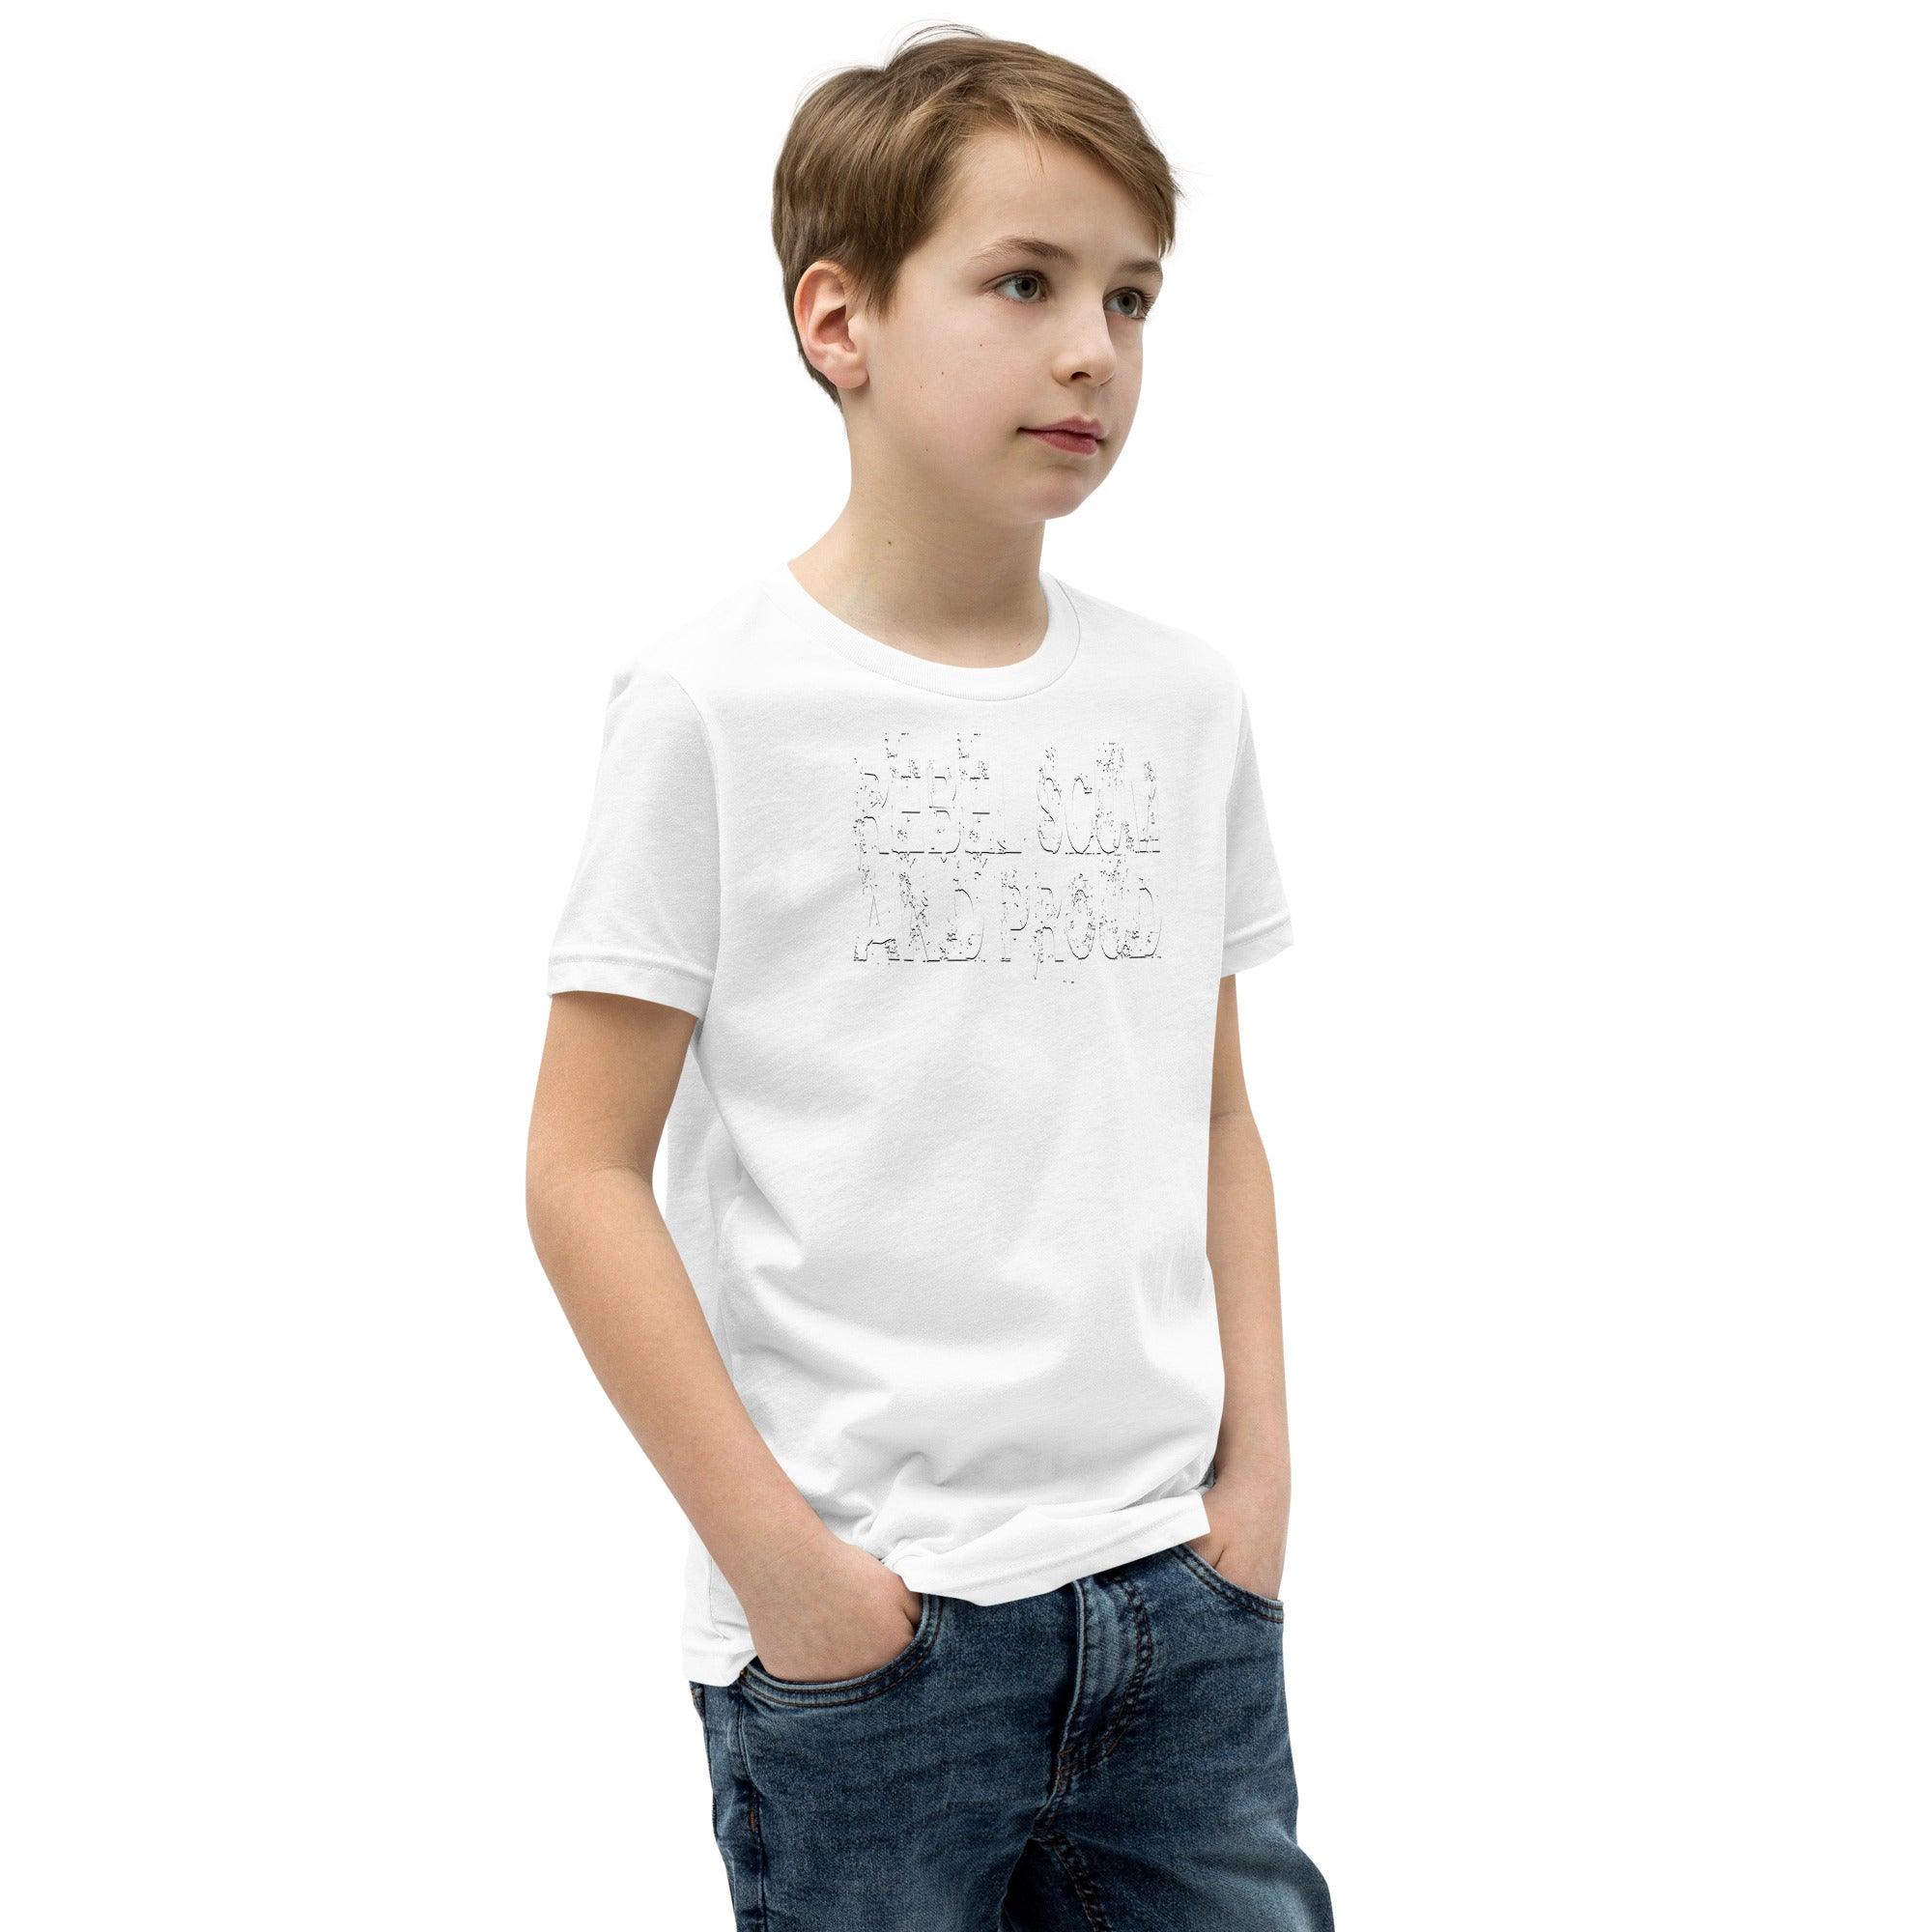 Rebel Scum and Proud Youth Short Sleeve T-Shirt